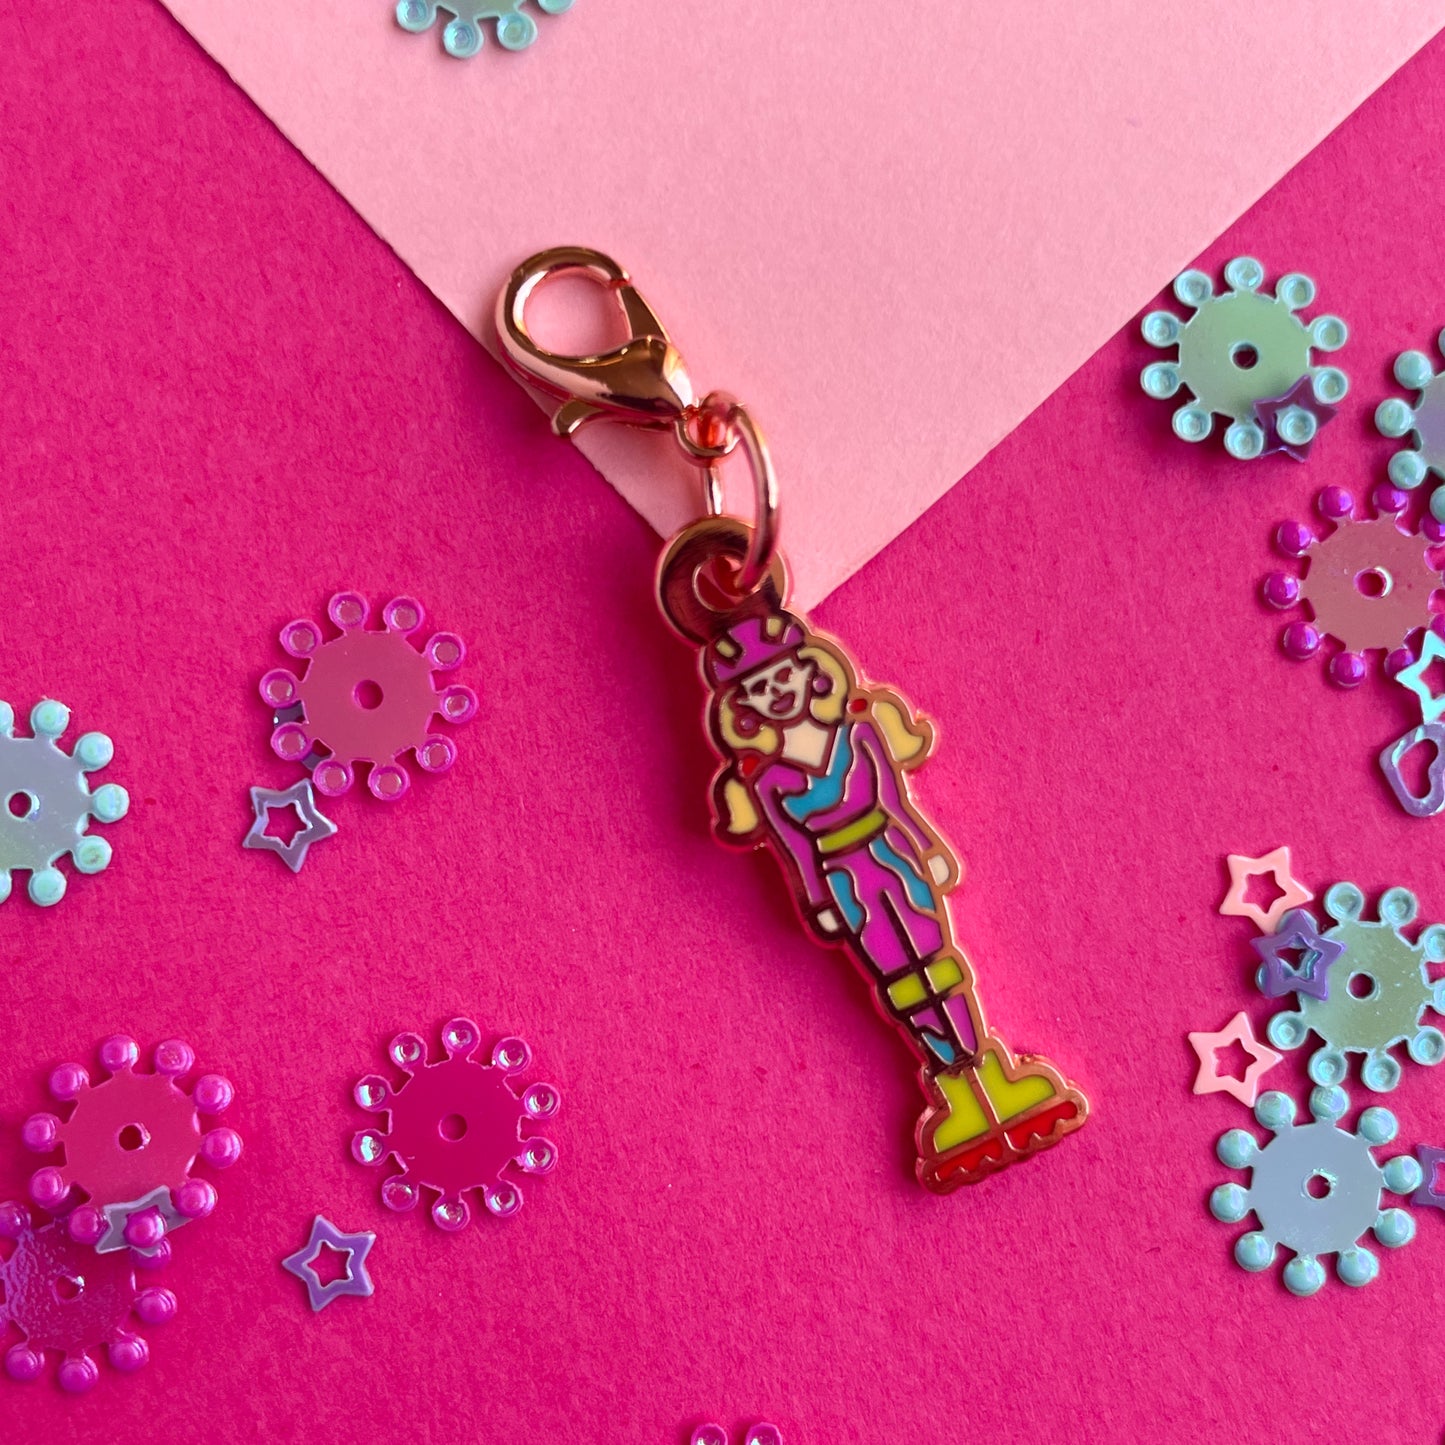 An enamel charm shaped like a barbie with pigtails wearing helmet and rollerblades on a pink paper background.